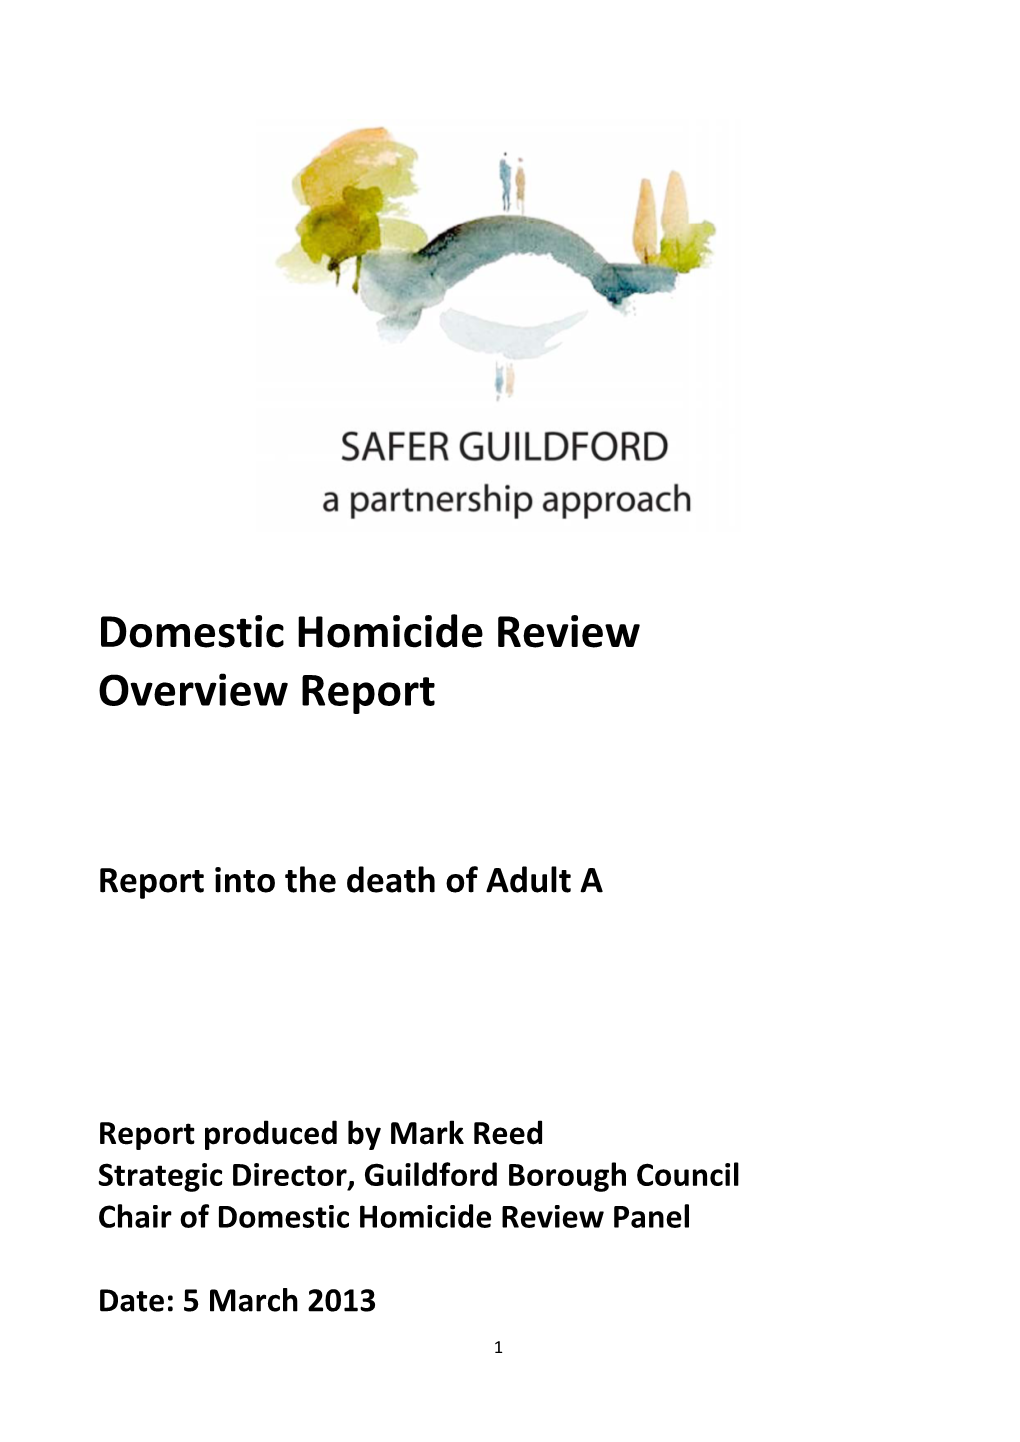 Domestic Homicide Review Overview Report